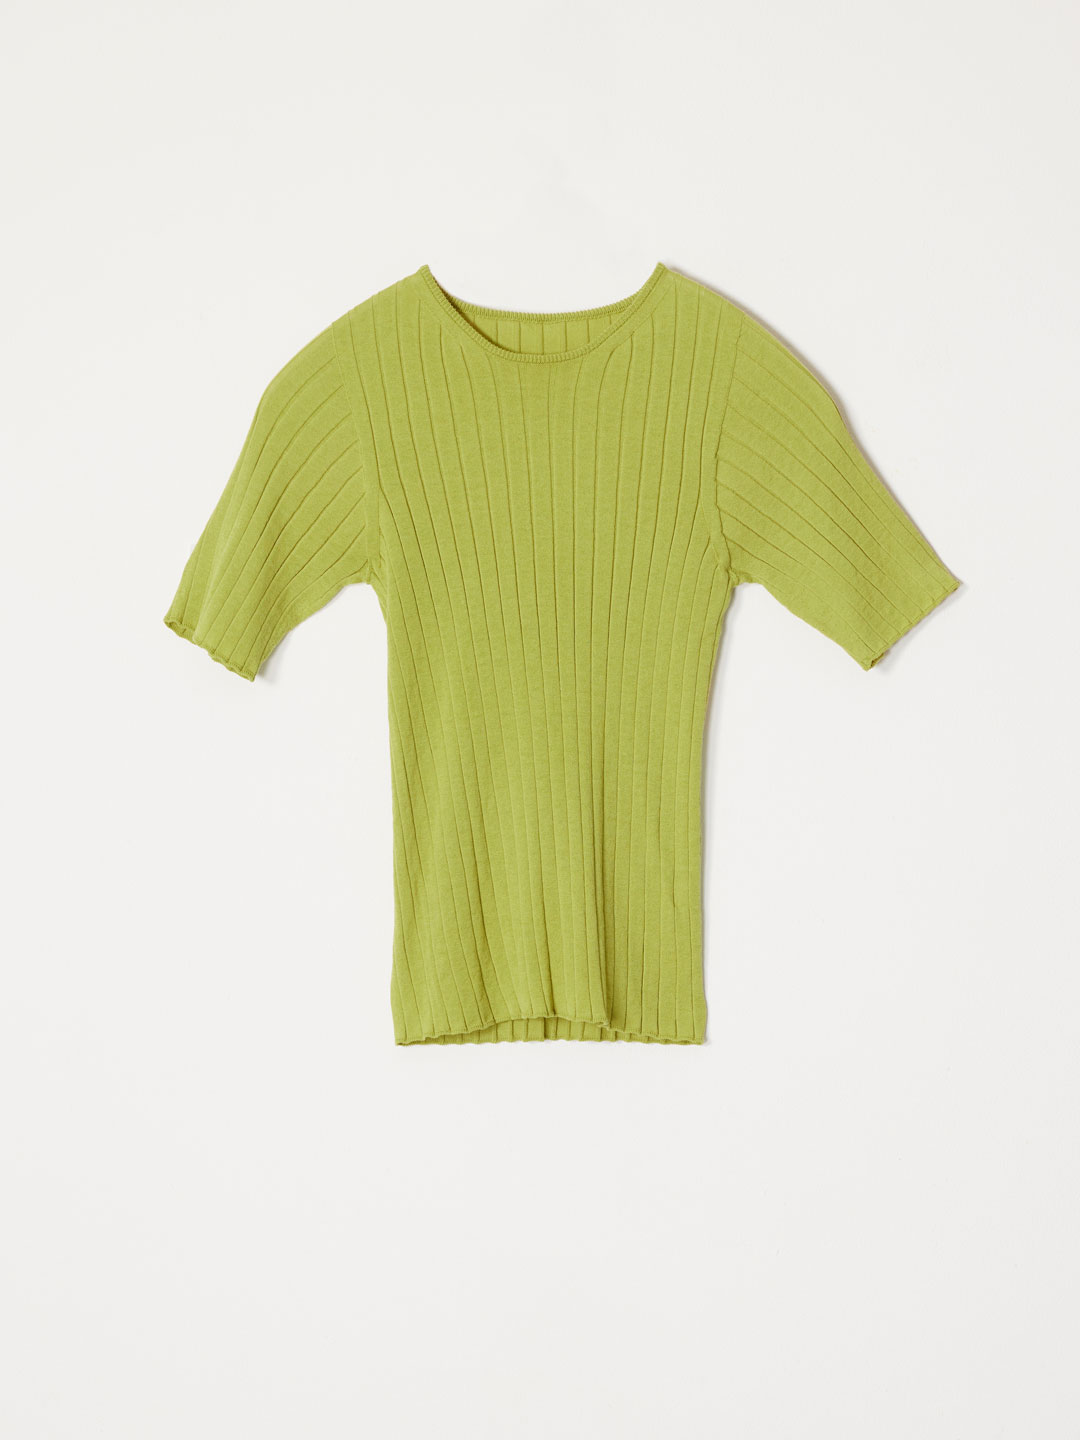 Cotton Wide Rib Knit Tee - Light Green/Lime